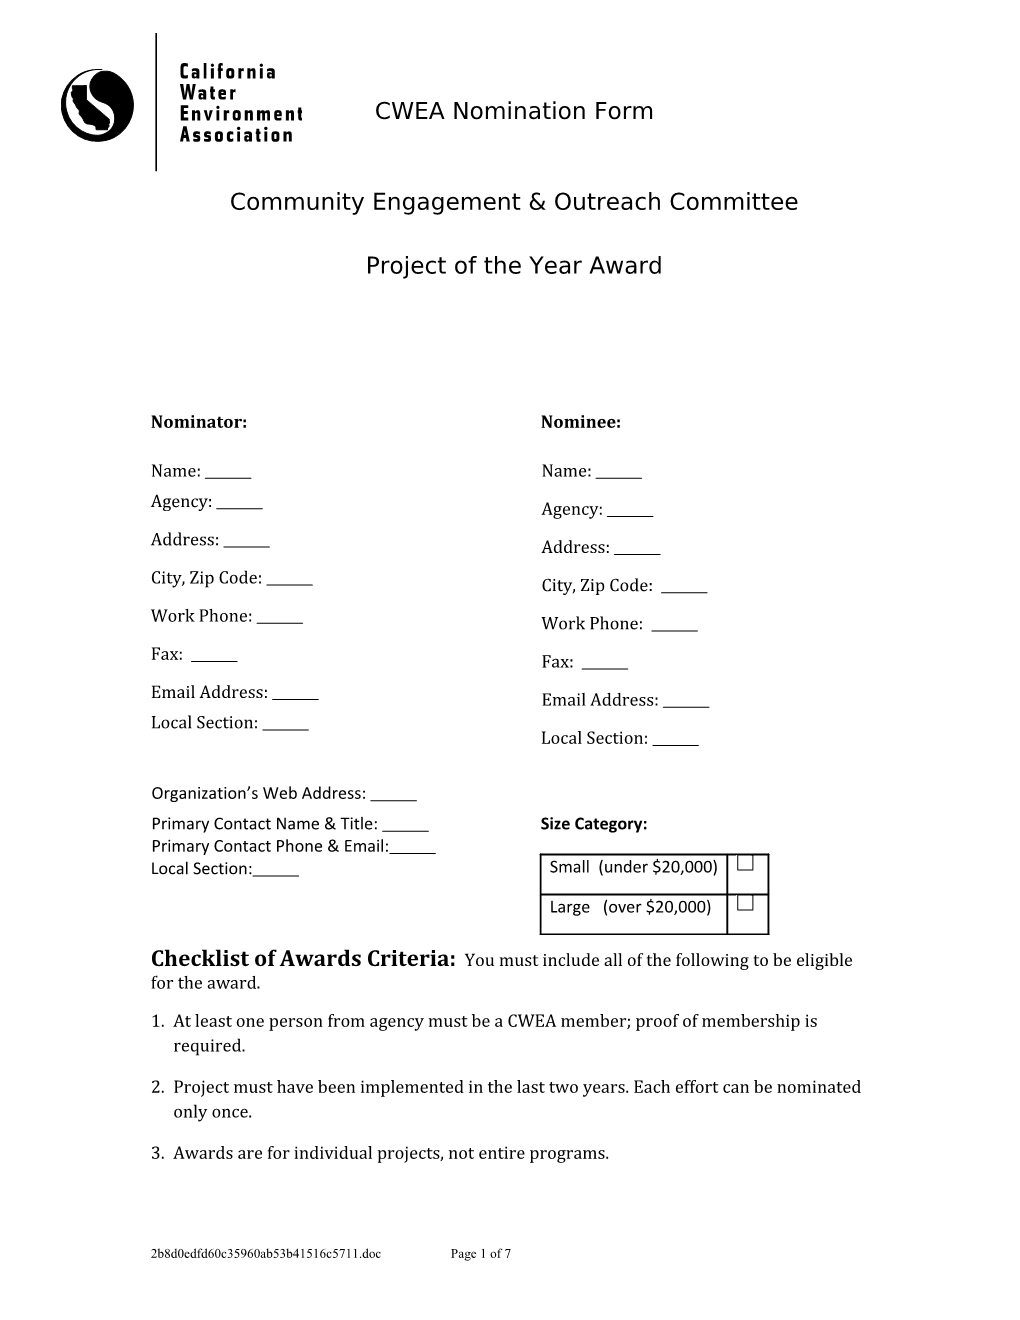 Community Engagement & Outreach Committee s1